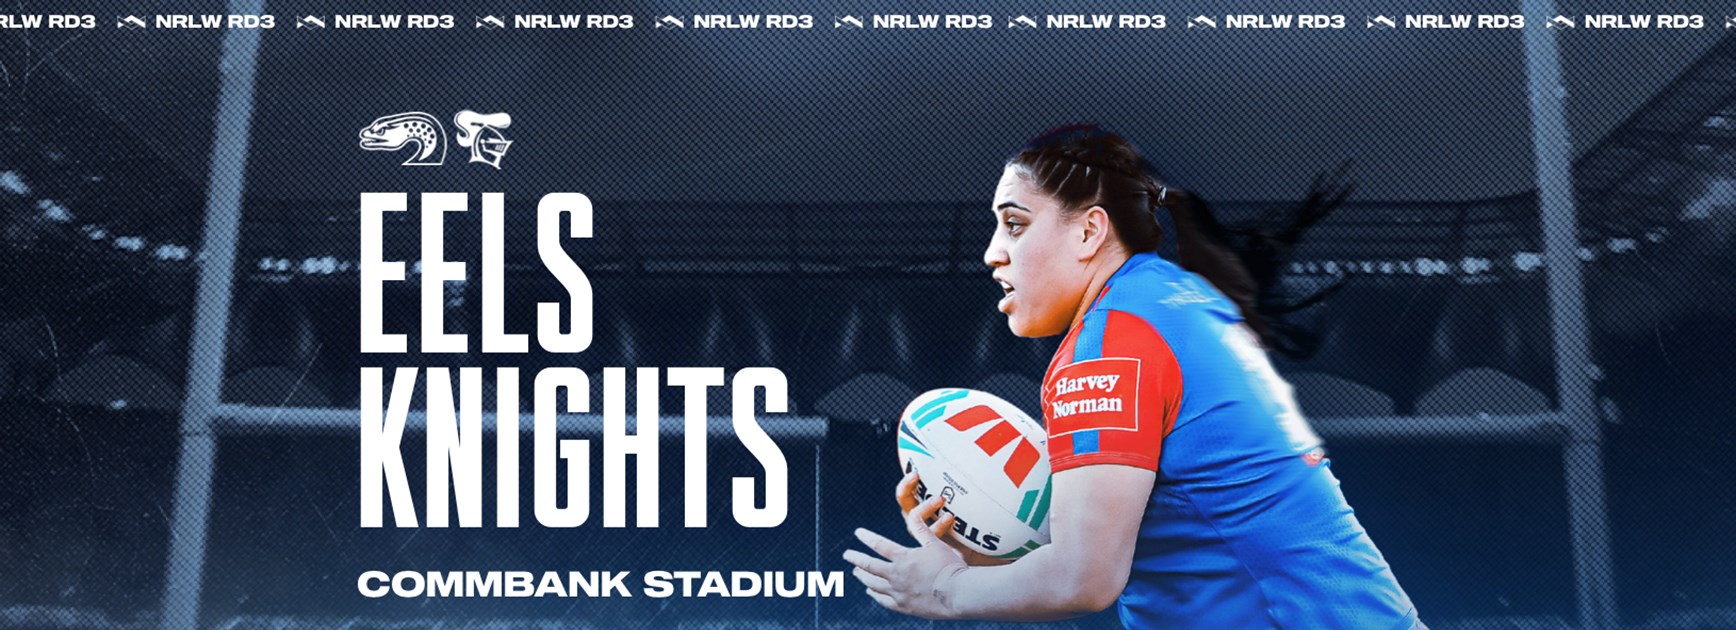 Defend the Kingdom: NRLW Round 3 preview | Knights